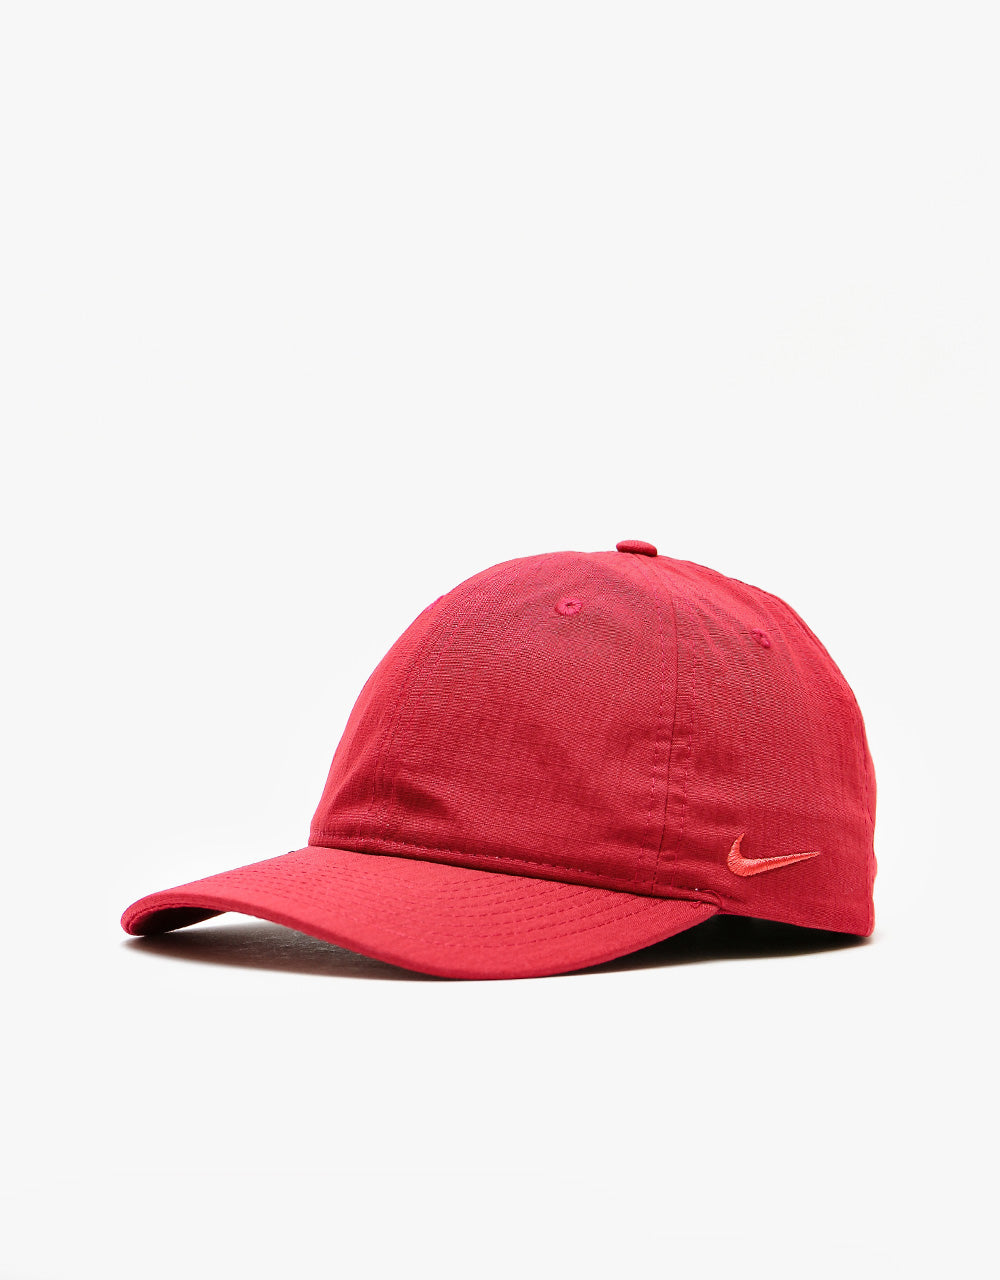 Nike SB H86 Flatbill Cap - Pomegranate/Lobster – Route One